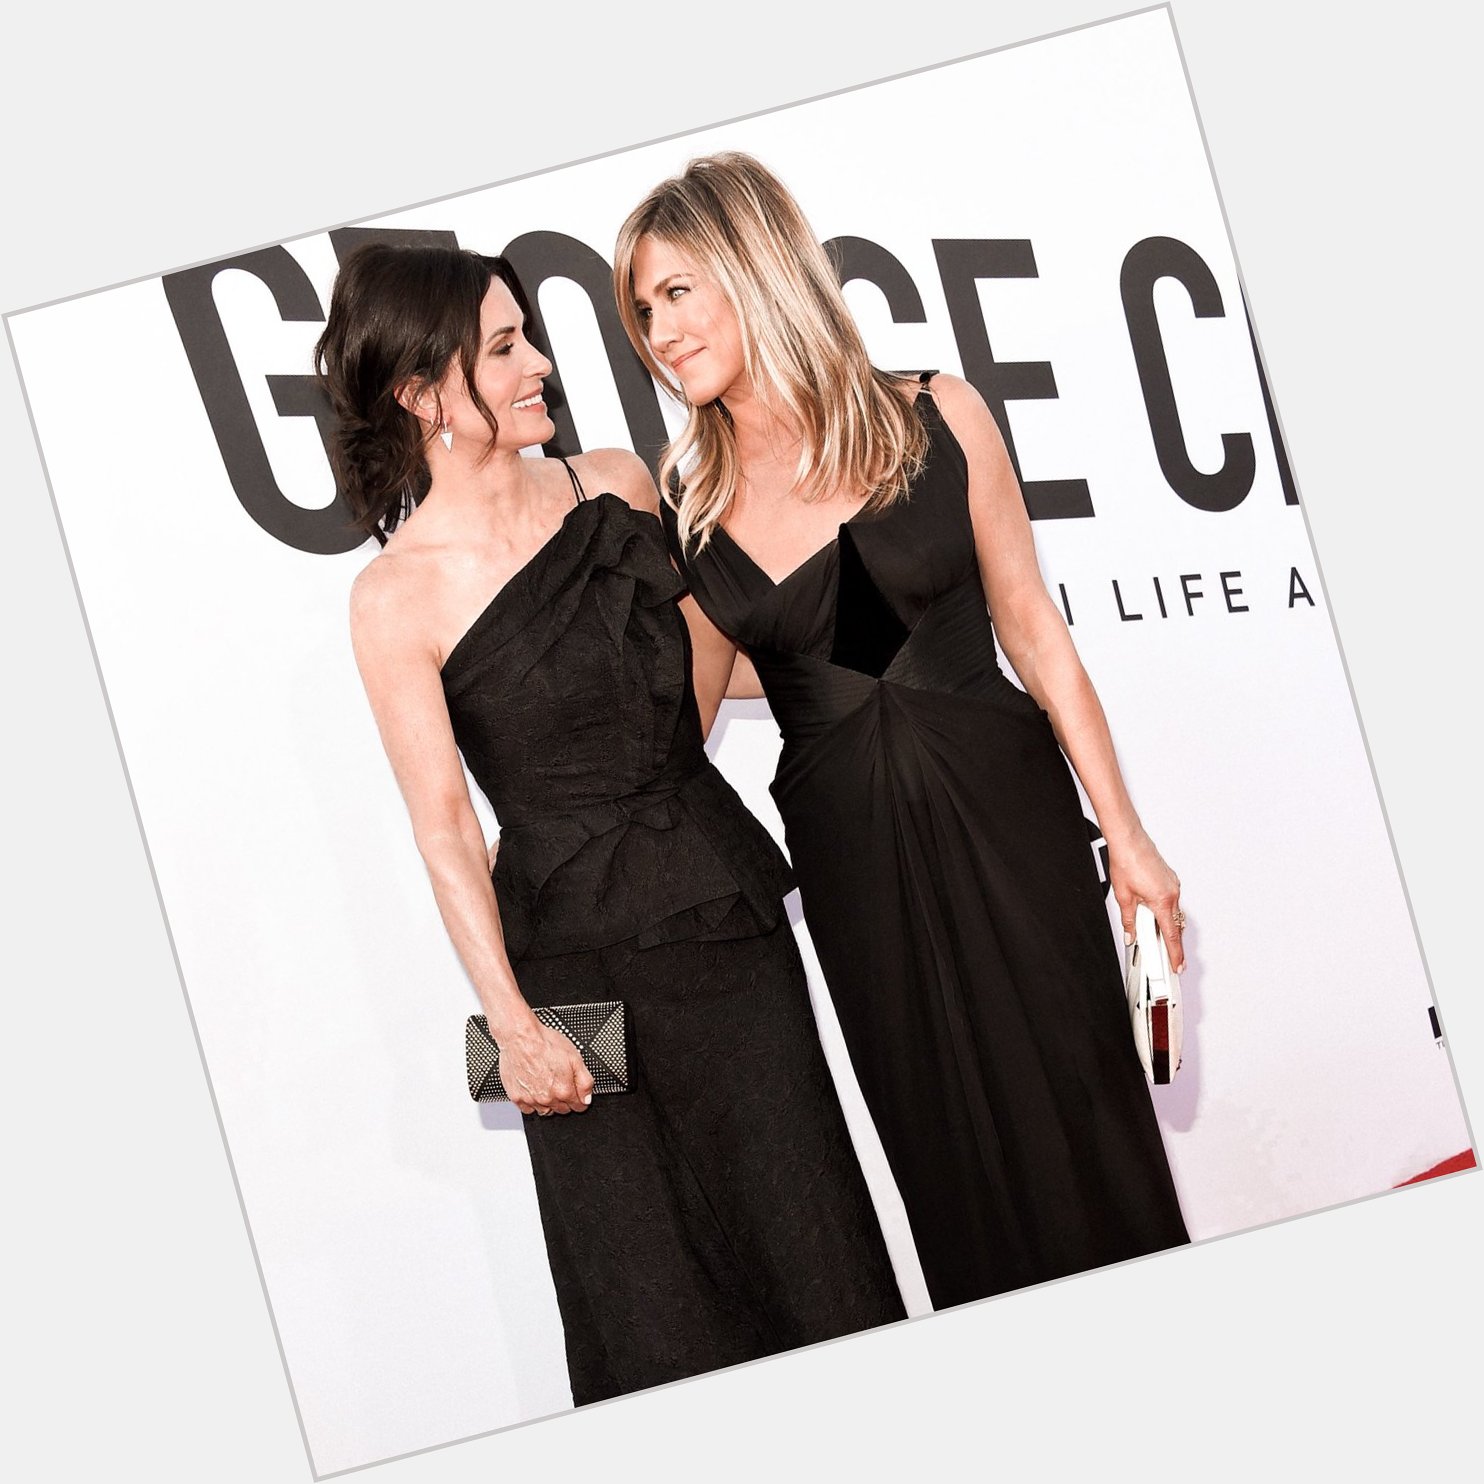 Happy birthday courteney cox! court, i hope you re having an amazing day filled with a lot of love and joy! 